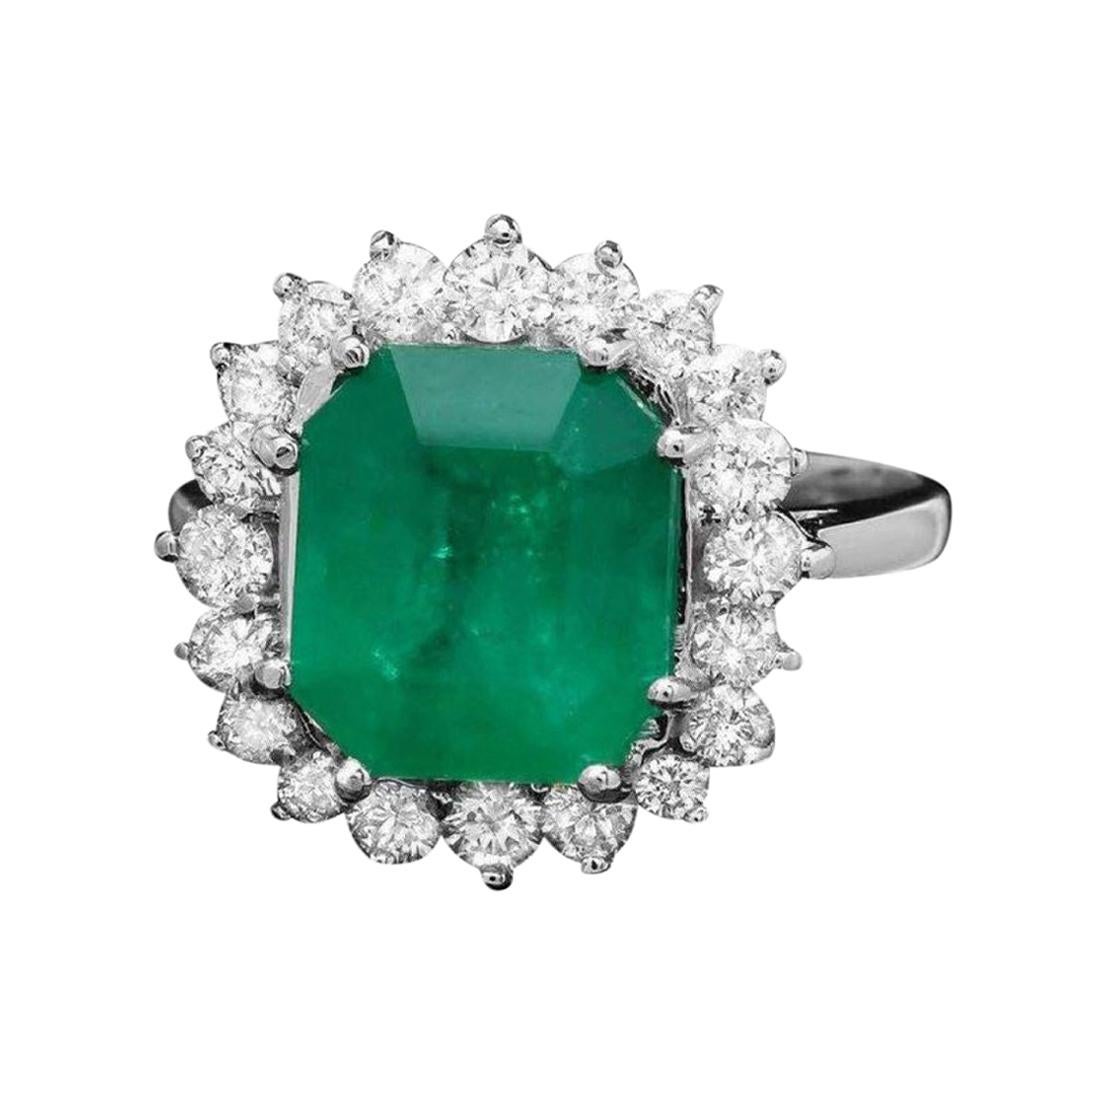 4.40ct Natural Emerald & Diamond 14k Solid White Gold Ring